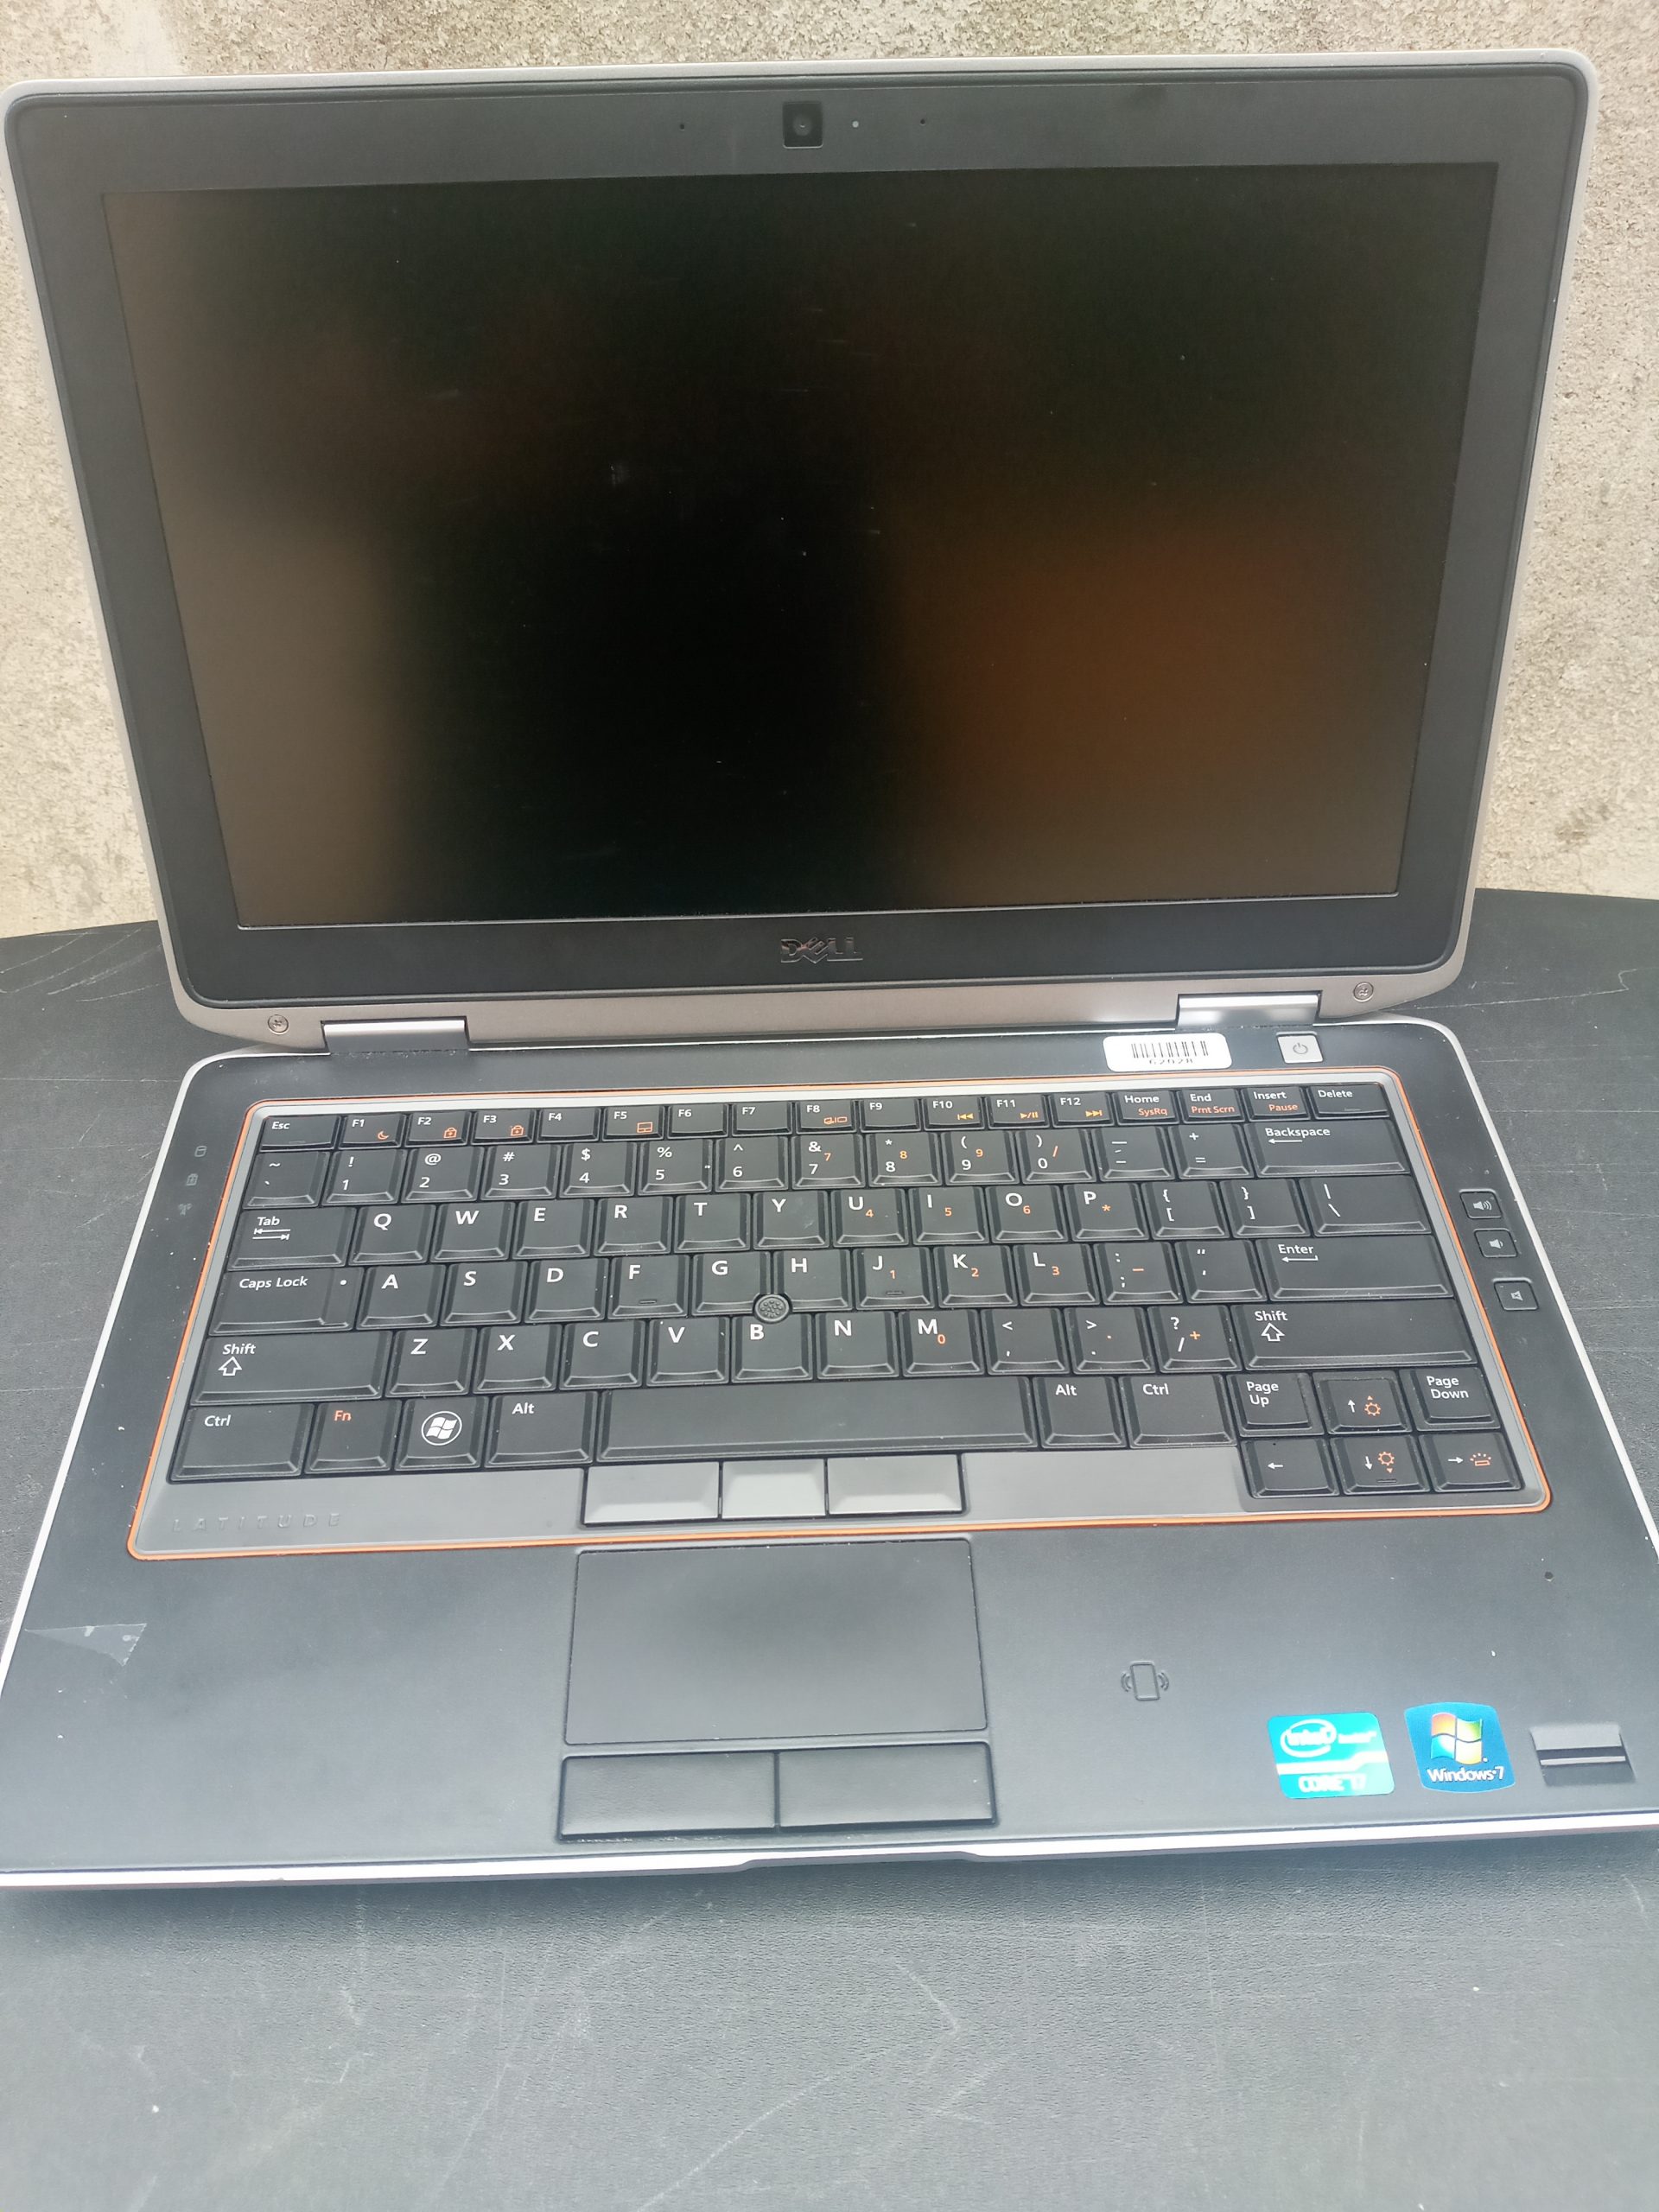 uk used laptop, london used laptop , Original laptop , computer shop in lagos , laptop for sale in lagos , computer stores in lagos nigeria , wholesale computer shop in lagos nigeria , laptop supply shops/store in lagos , Hp laptop for sale , dell laptops for sale , buy laptops online, lenovo laptop for sale , shopeinverse store in lagos , shopinverse computer , shopinverse laptops , note books computers , second hand laptop,Dell Latitude E6320 4GB Intel Core I7 HDD 500GB for sale cheap laptop for sale in lagos , laptop charger for sale in lagos, original wholes sale laptop charger for sale in lagos computer village nigeria laptop repair shop in lagos, gbn mobile computers , gbn mobile laptops /computers store, computer village lagos ikeja shops , laptops for sale in computer village , cheap laptops in computer village , laptop warehouse in lagos nigeria, computer warehouse in ikeja computer , buy/swap laptops in ikeja computer village , laptop pay on delivery in lagos ikeja , laptops with good Guarantee /warranty shop in lagos